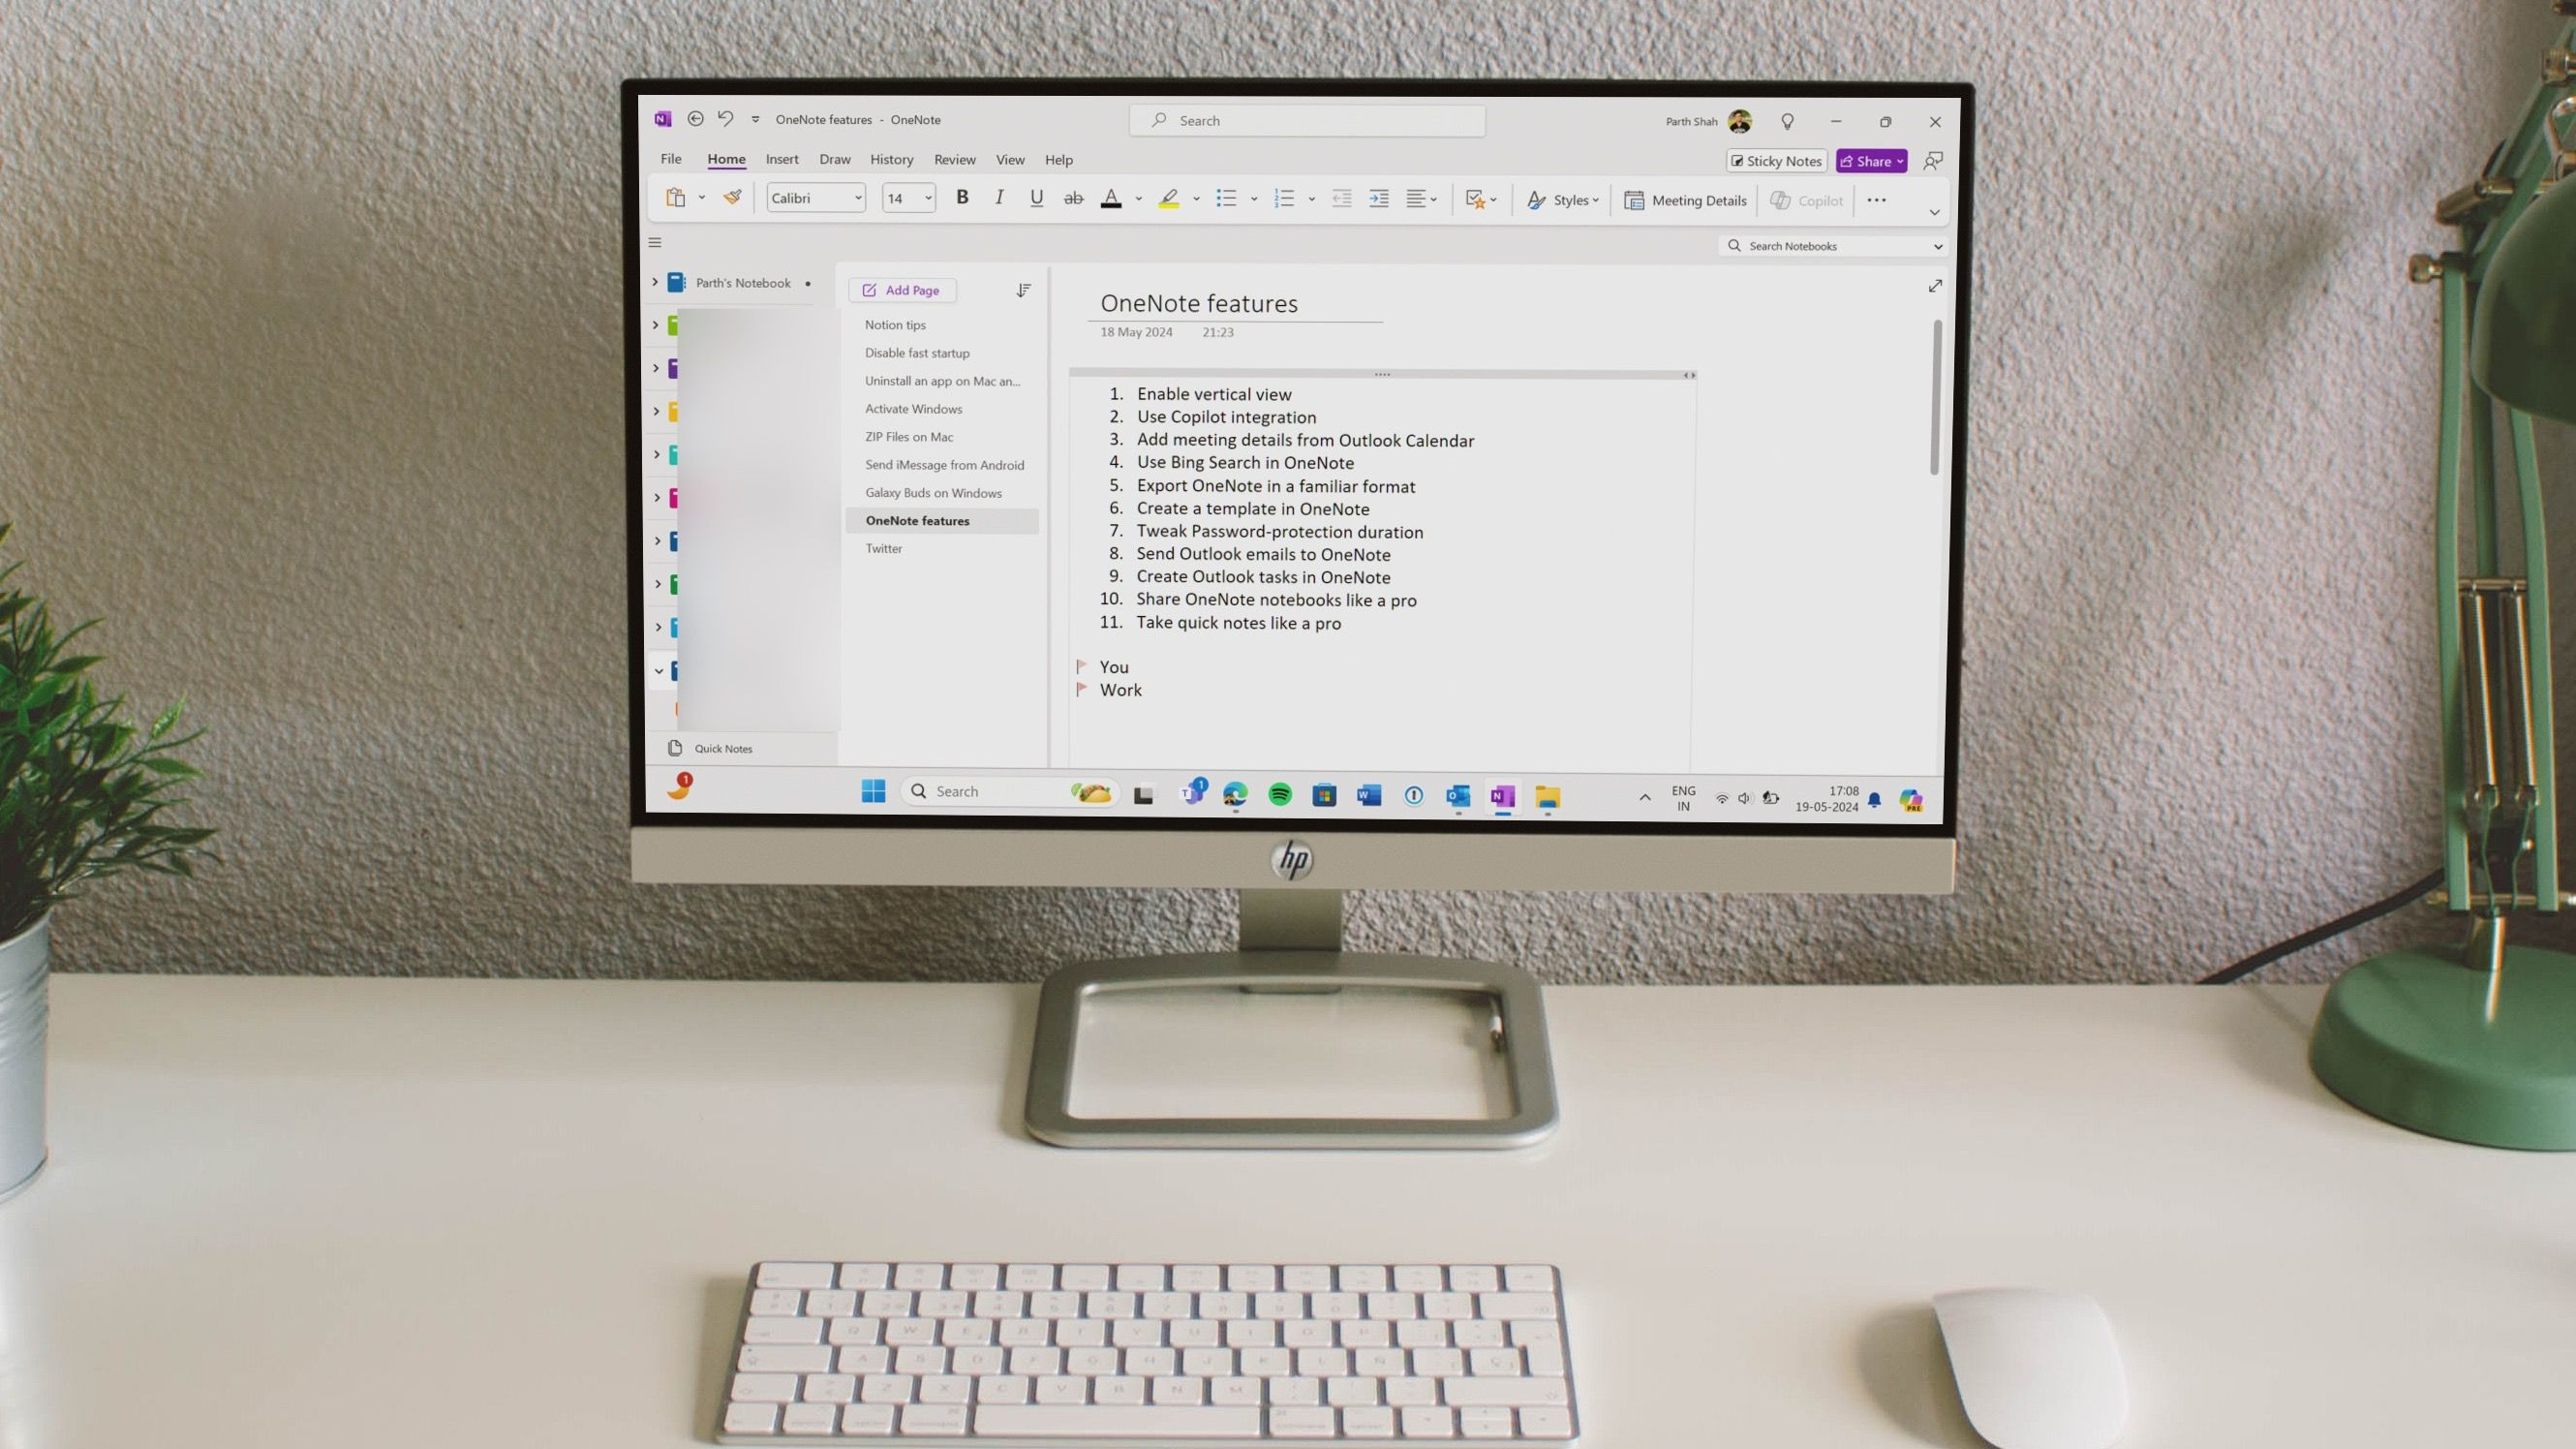 How to use the most advanced OneNote features to supercharge your note taking